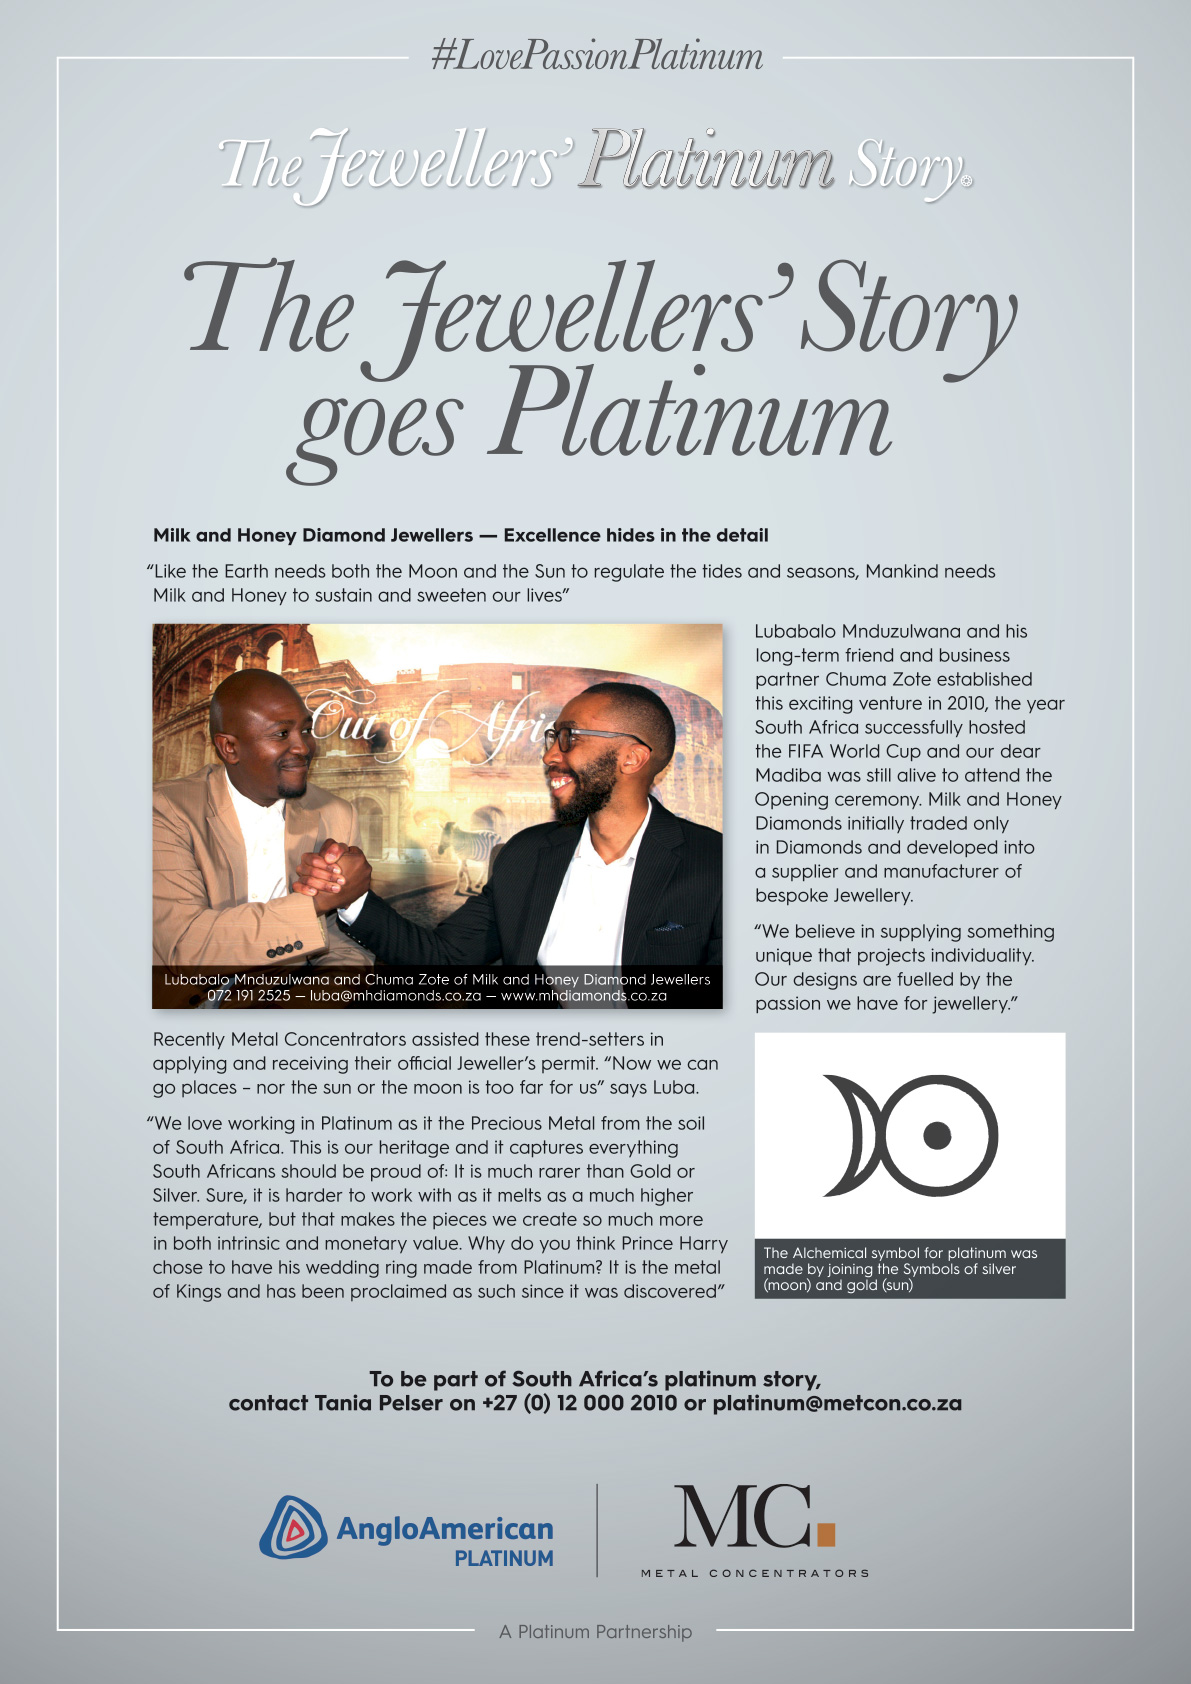 The Jewellers’ Story goes Platinum